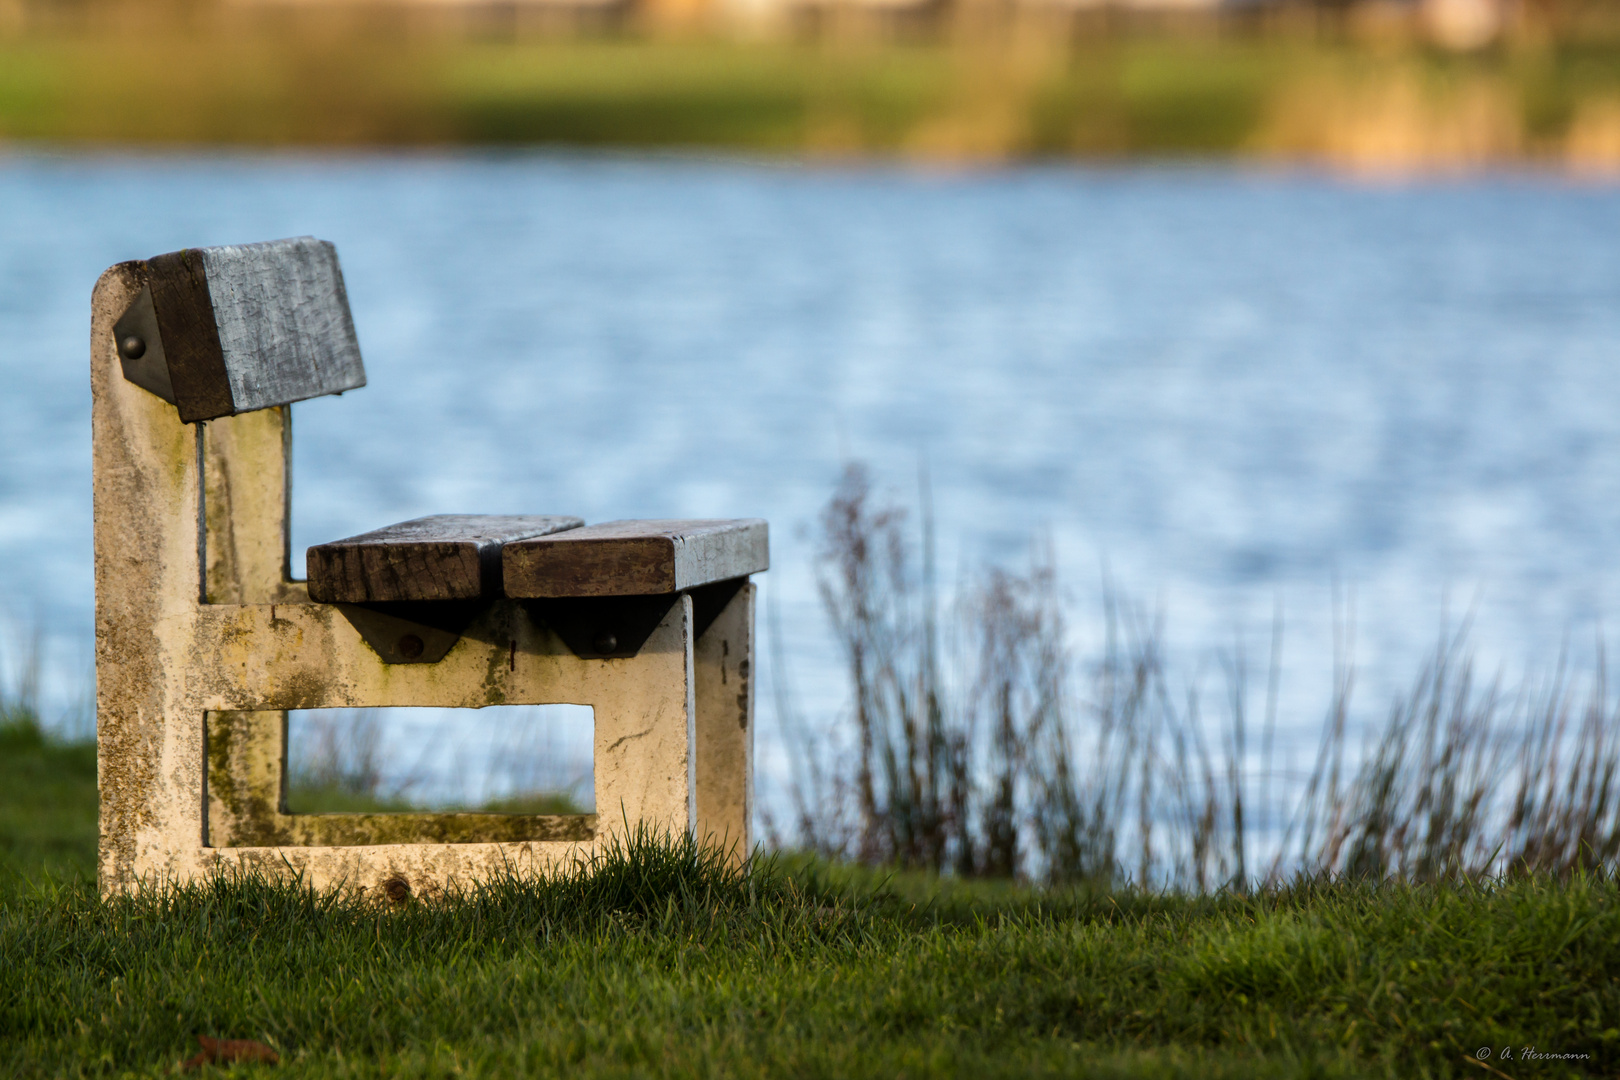 Bank am See / Bench by the lake